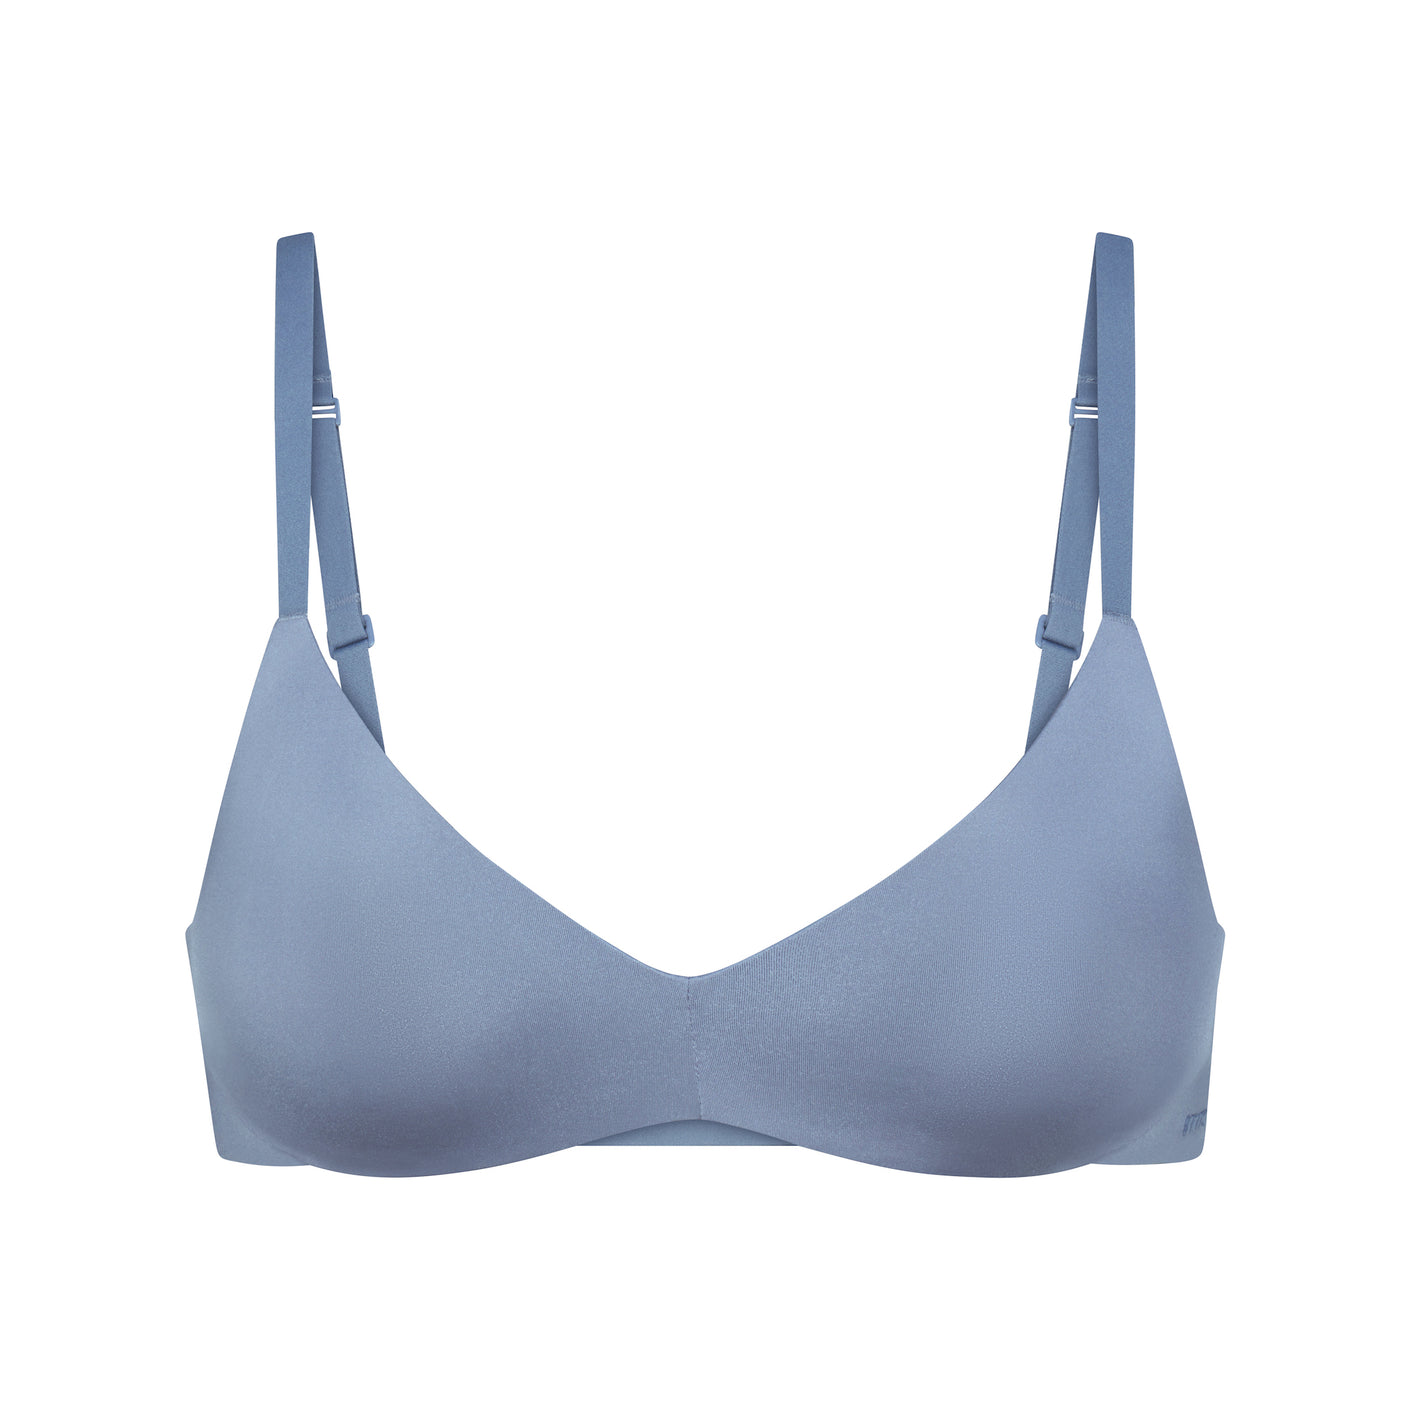 SKIMS NWT Women's Wireless Form Push-Up Plunge Bra Clay CHECK LAST PICS Tan  Size undefined - $39 - From Cutie